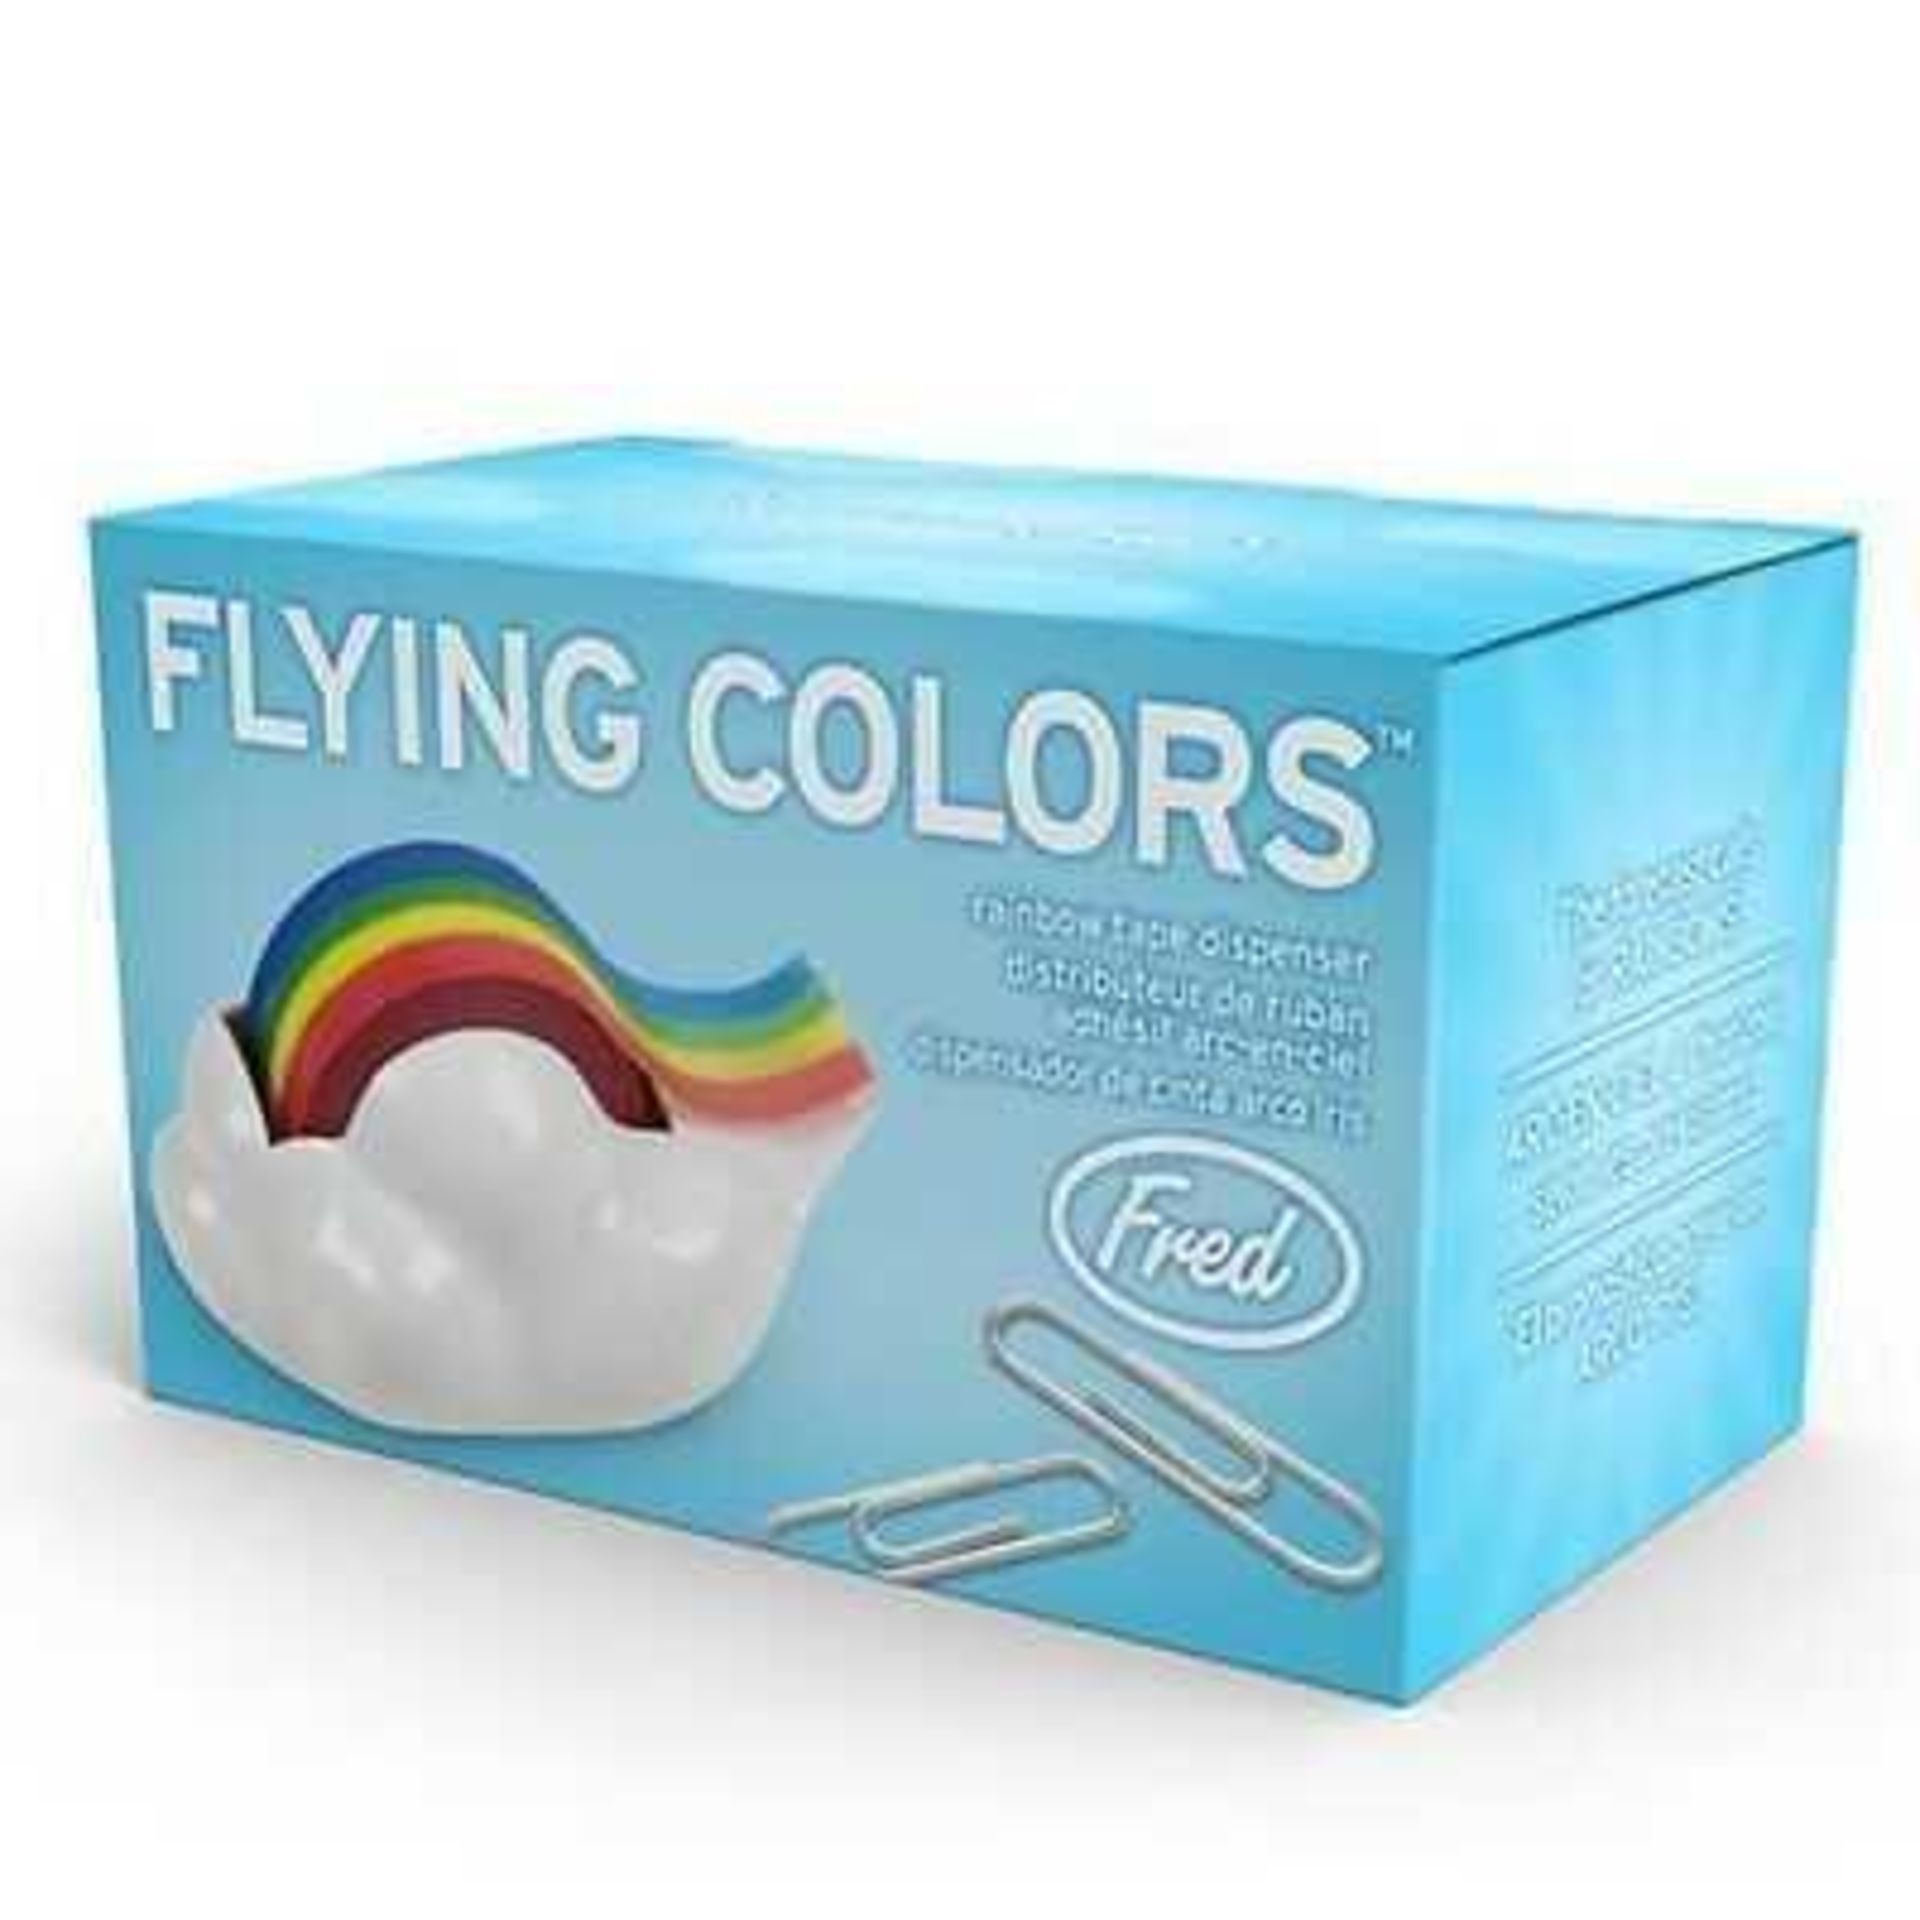 (Jb) RRP £480 Lot To Contain 48 Brand New Boxed High End Department Store Fred Flying Colours Cloud